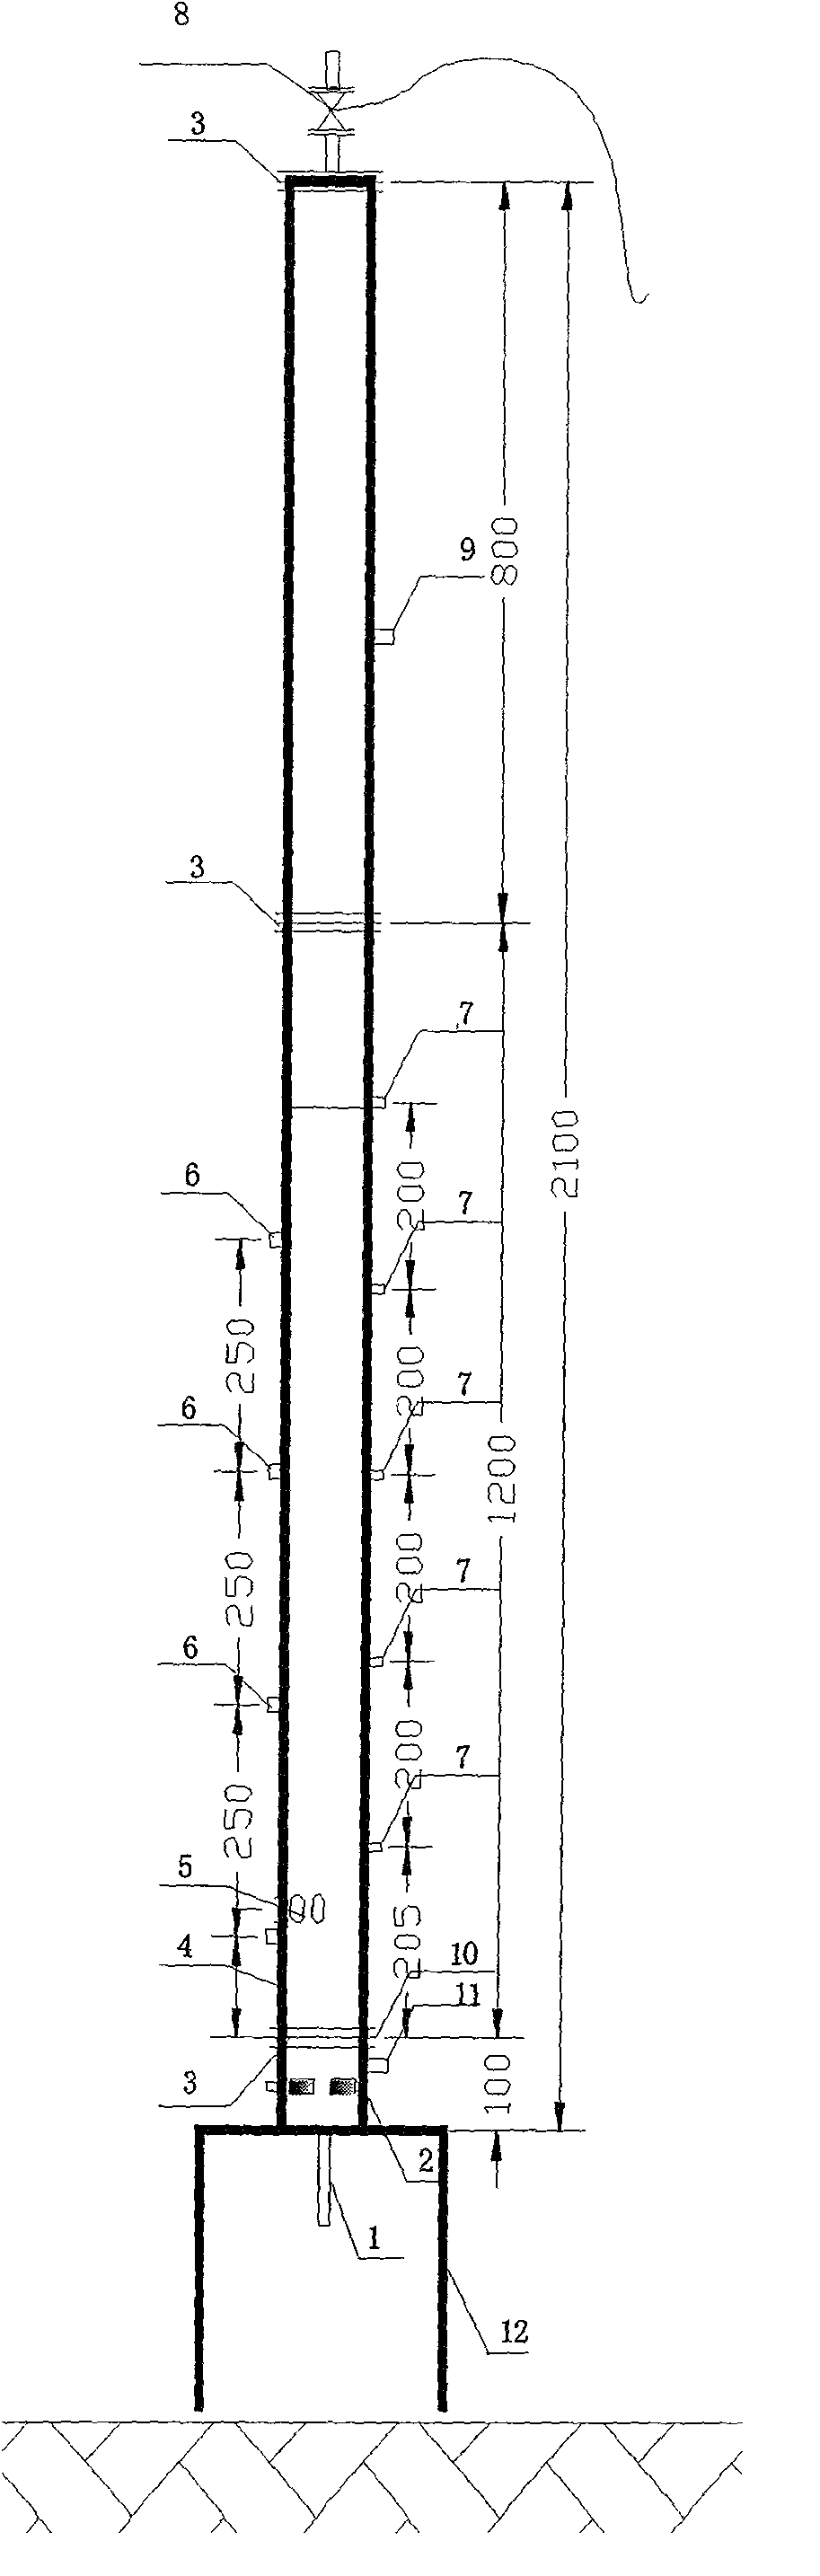 Device and method for continuously operation and reinforcement of biomembrane phosphate removing